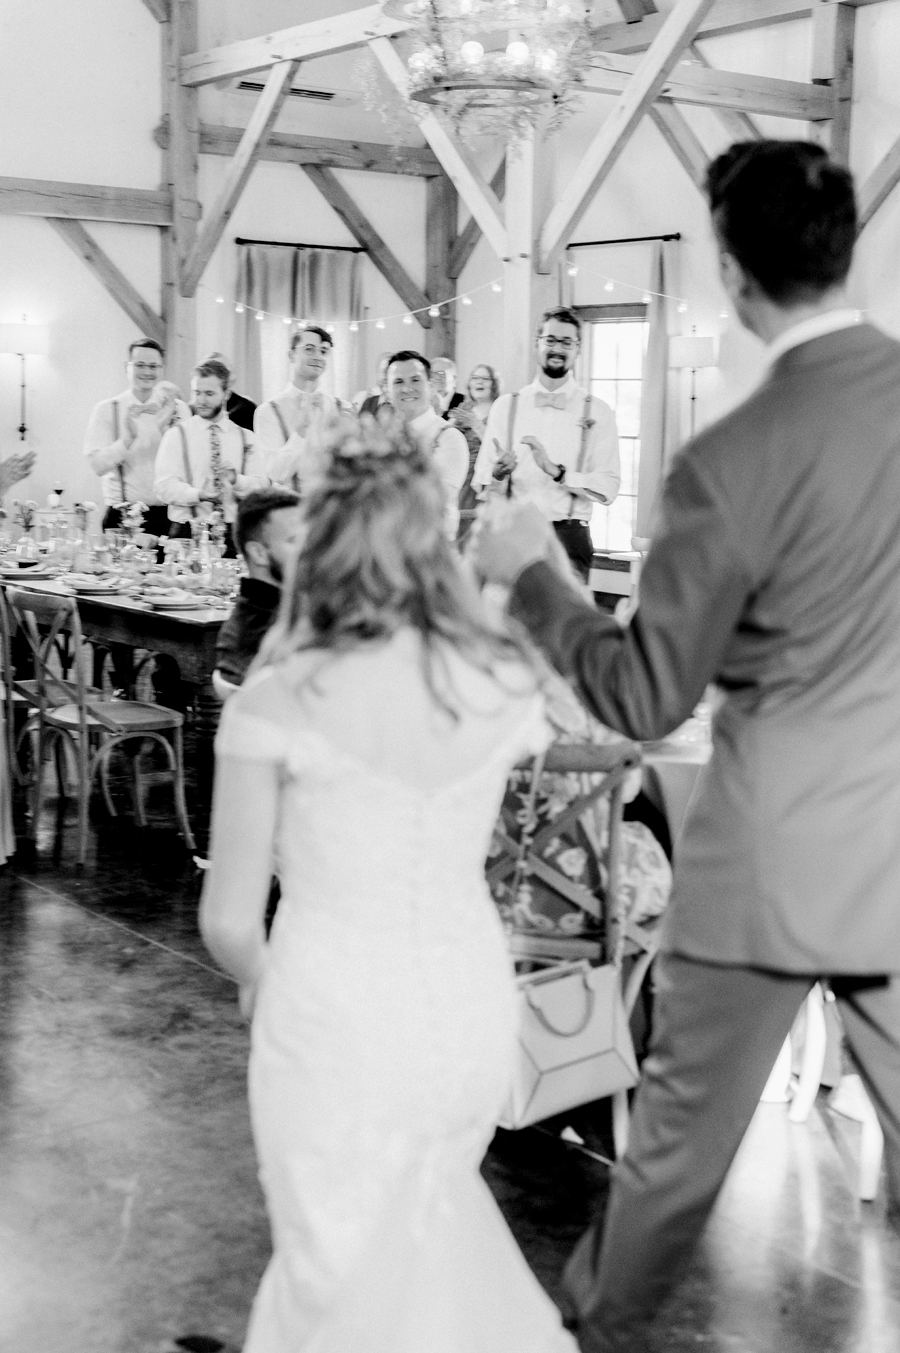 Guests cheer as the bride and groom enter the reception at a Blue Bell Farm wedding by Love Tree Studios.